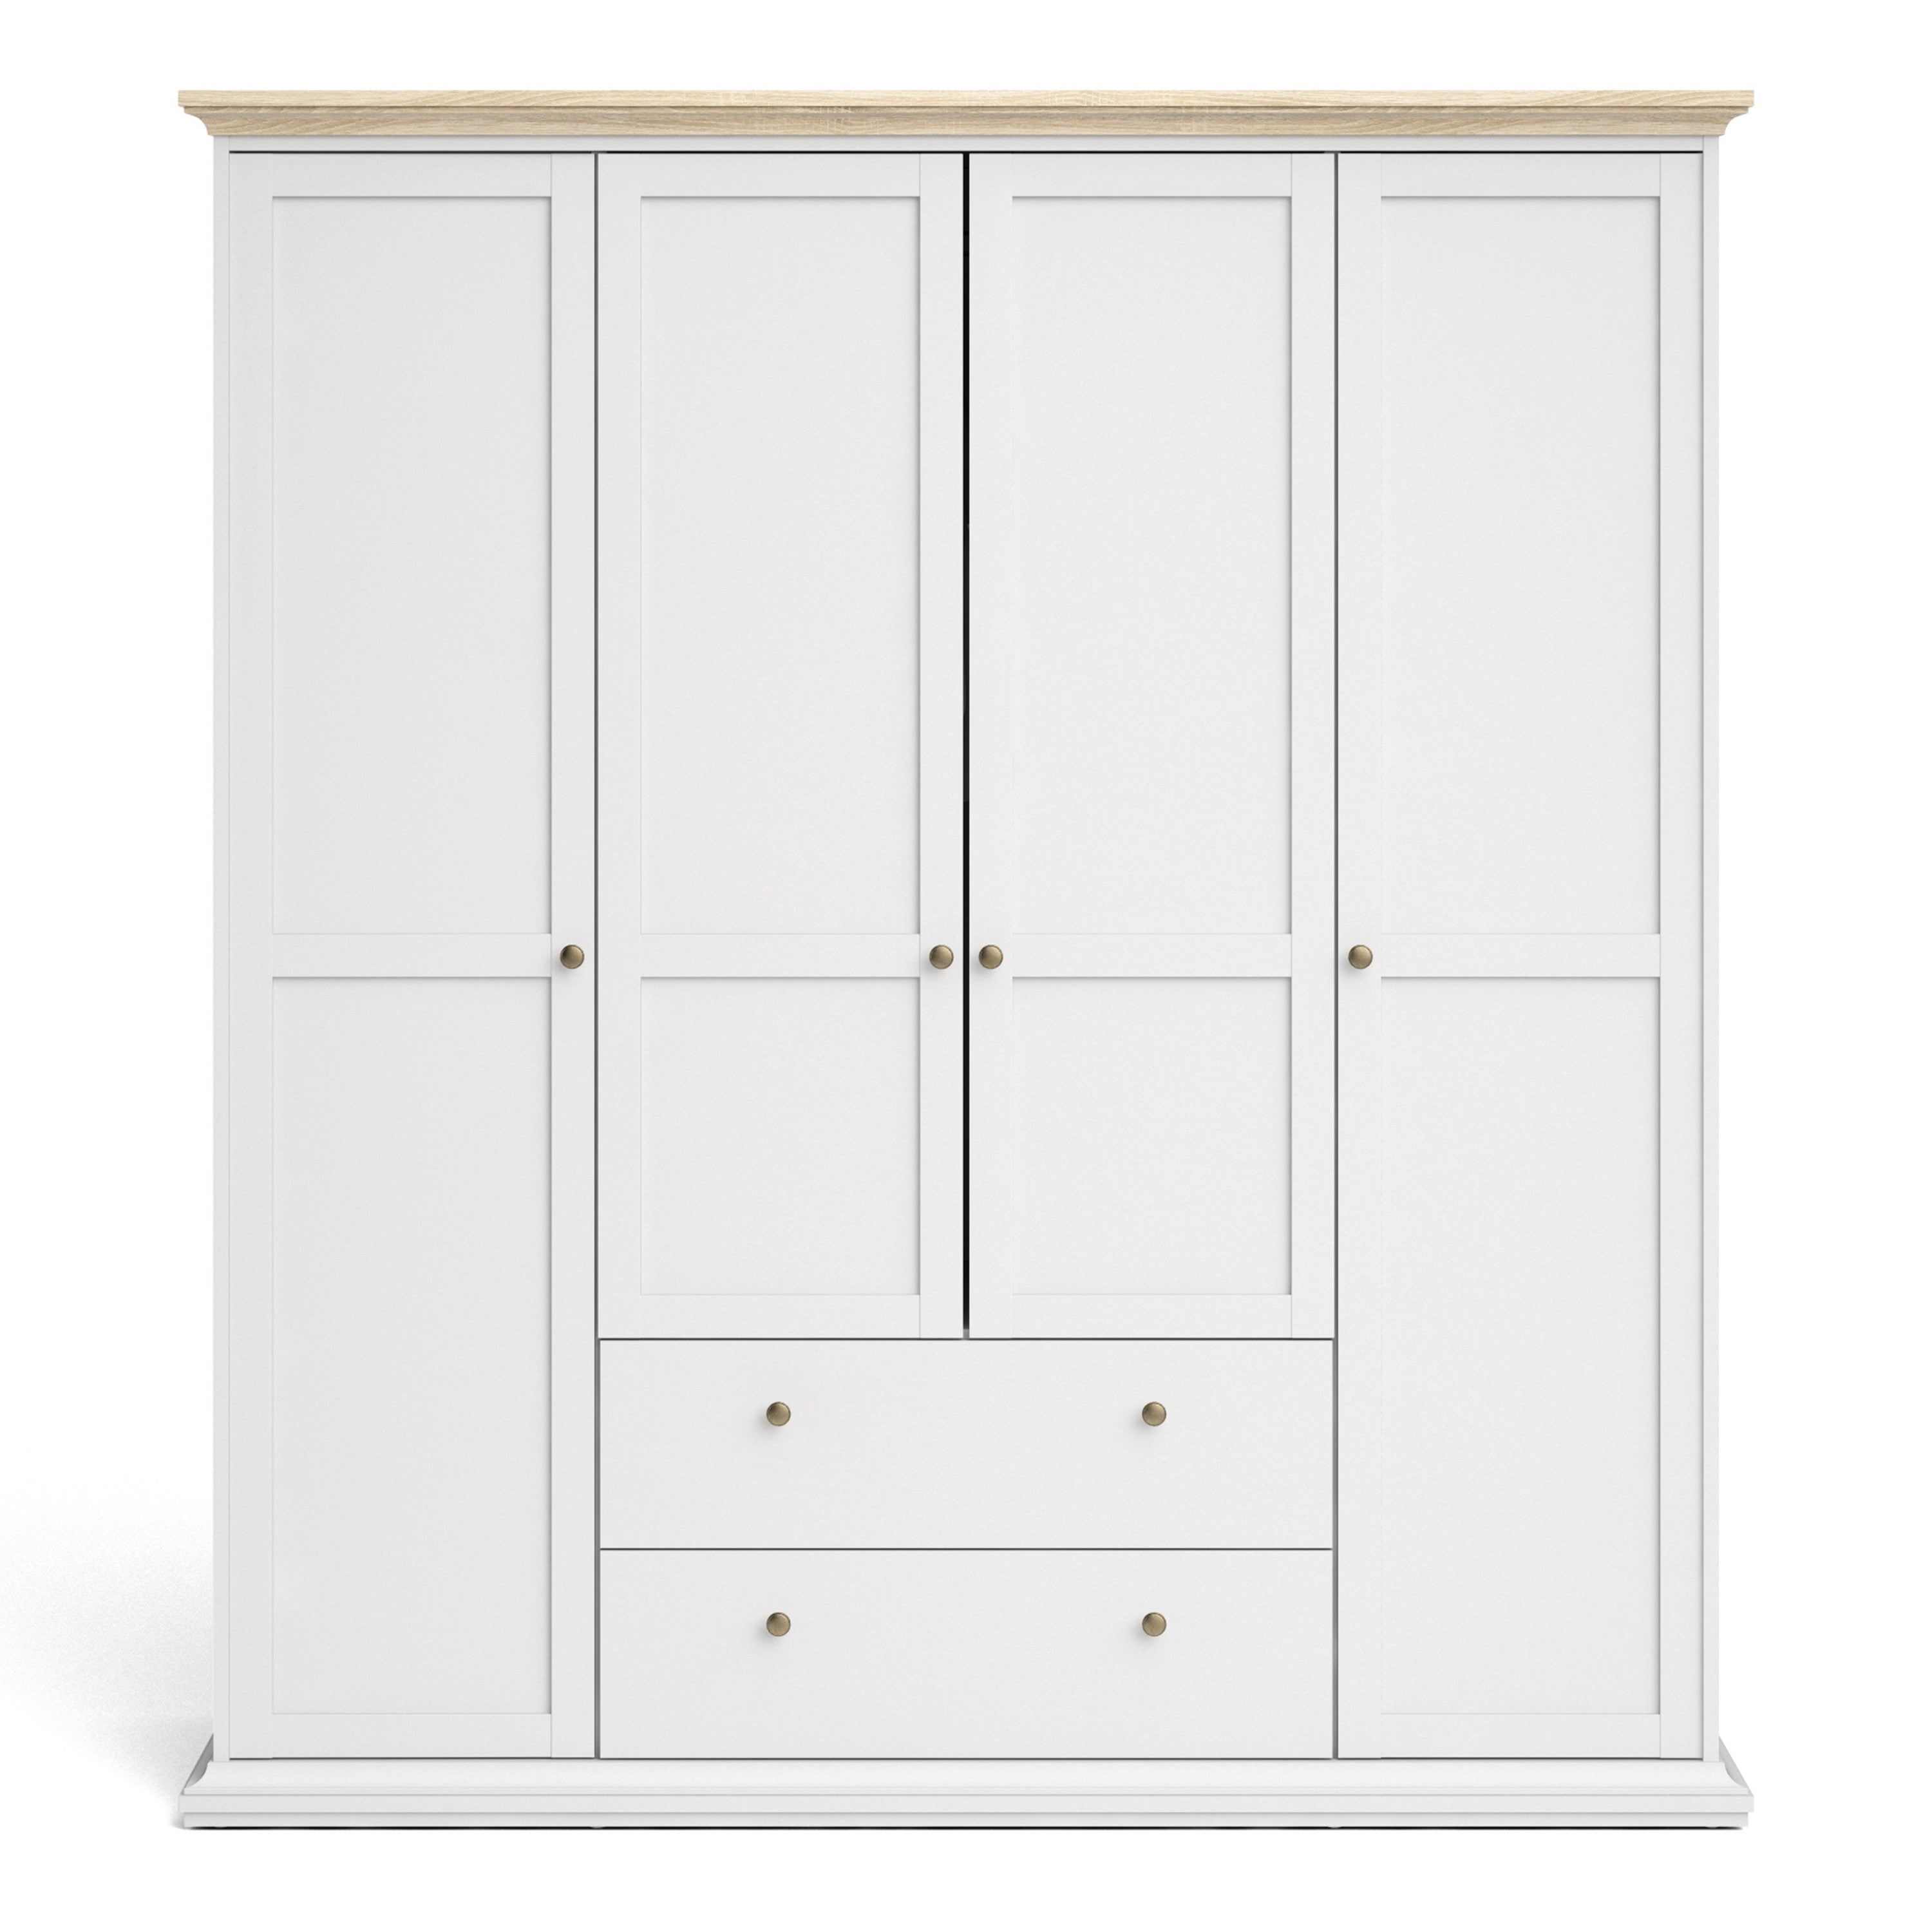 Paris Wardrobe with 4 Doors & 2 Drawers in White and Oak